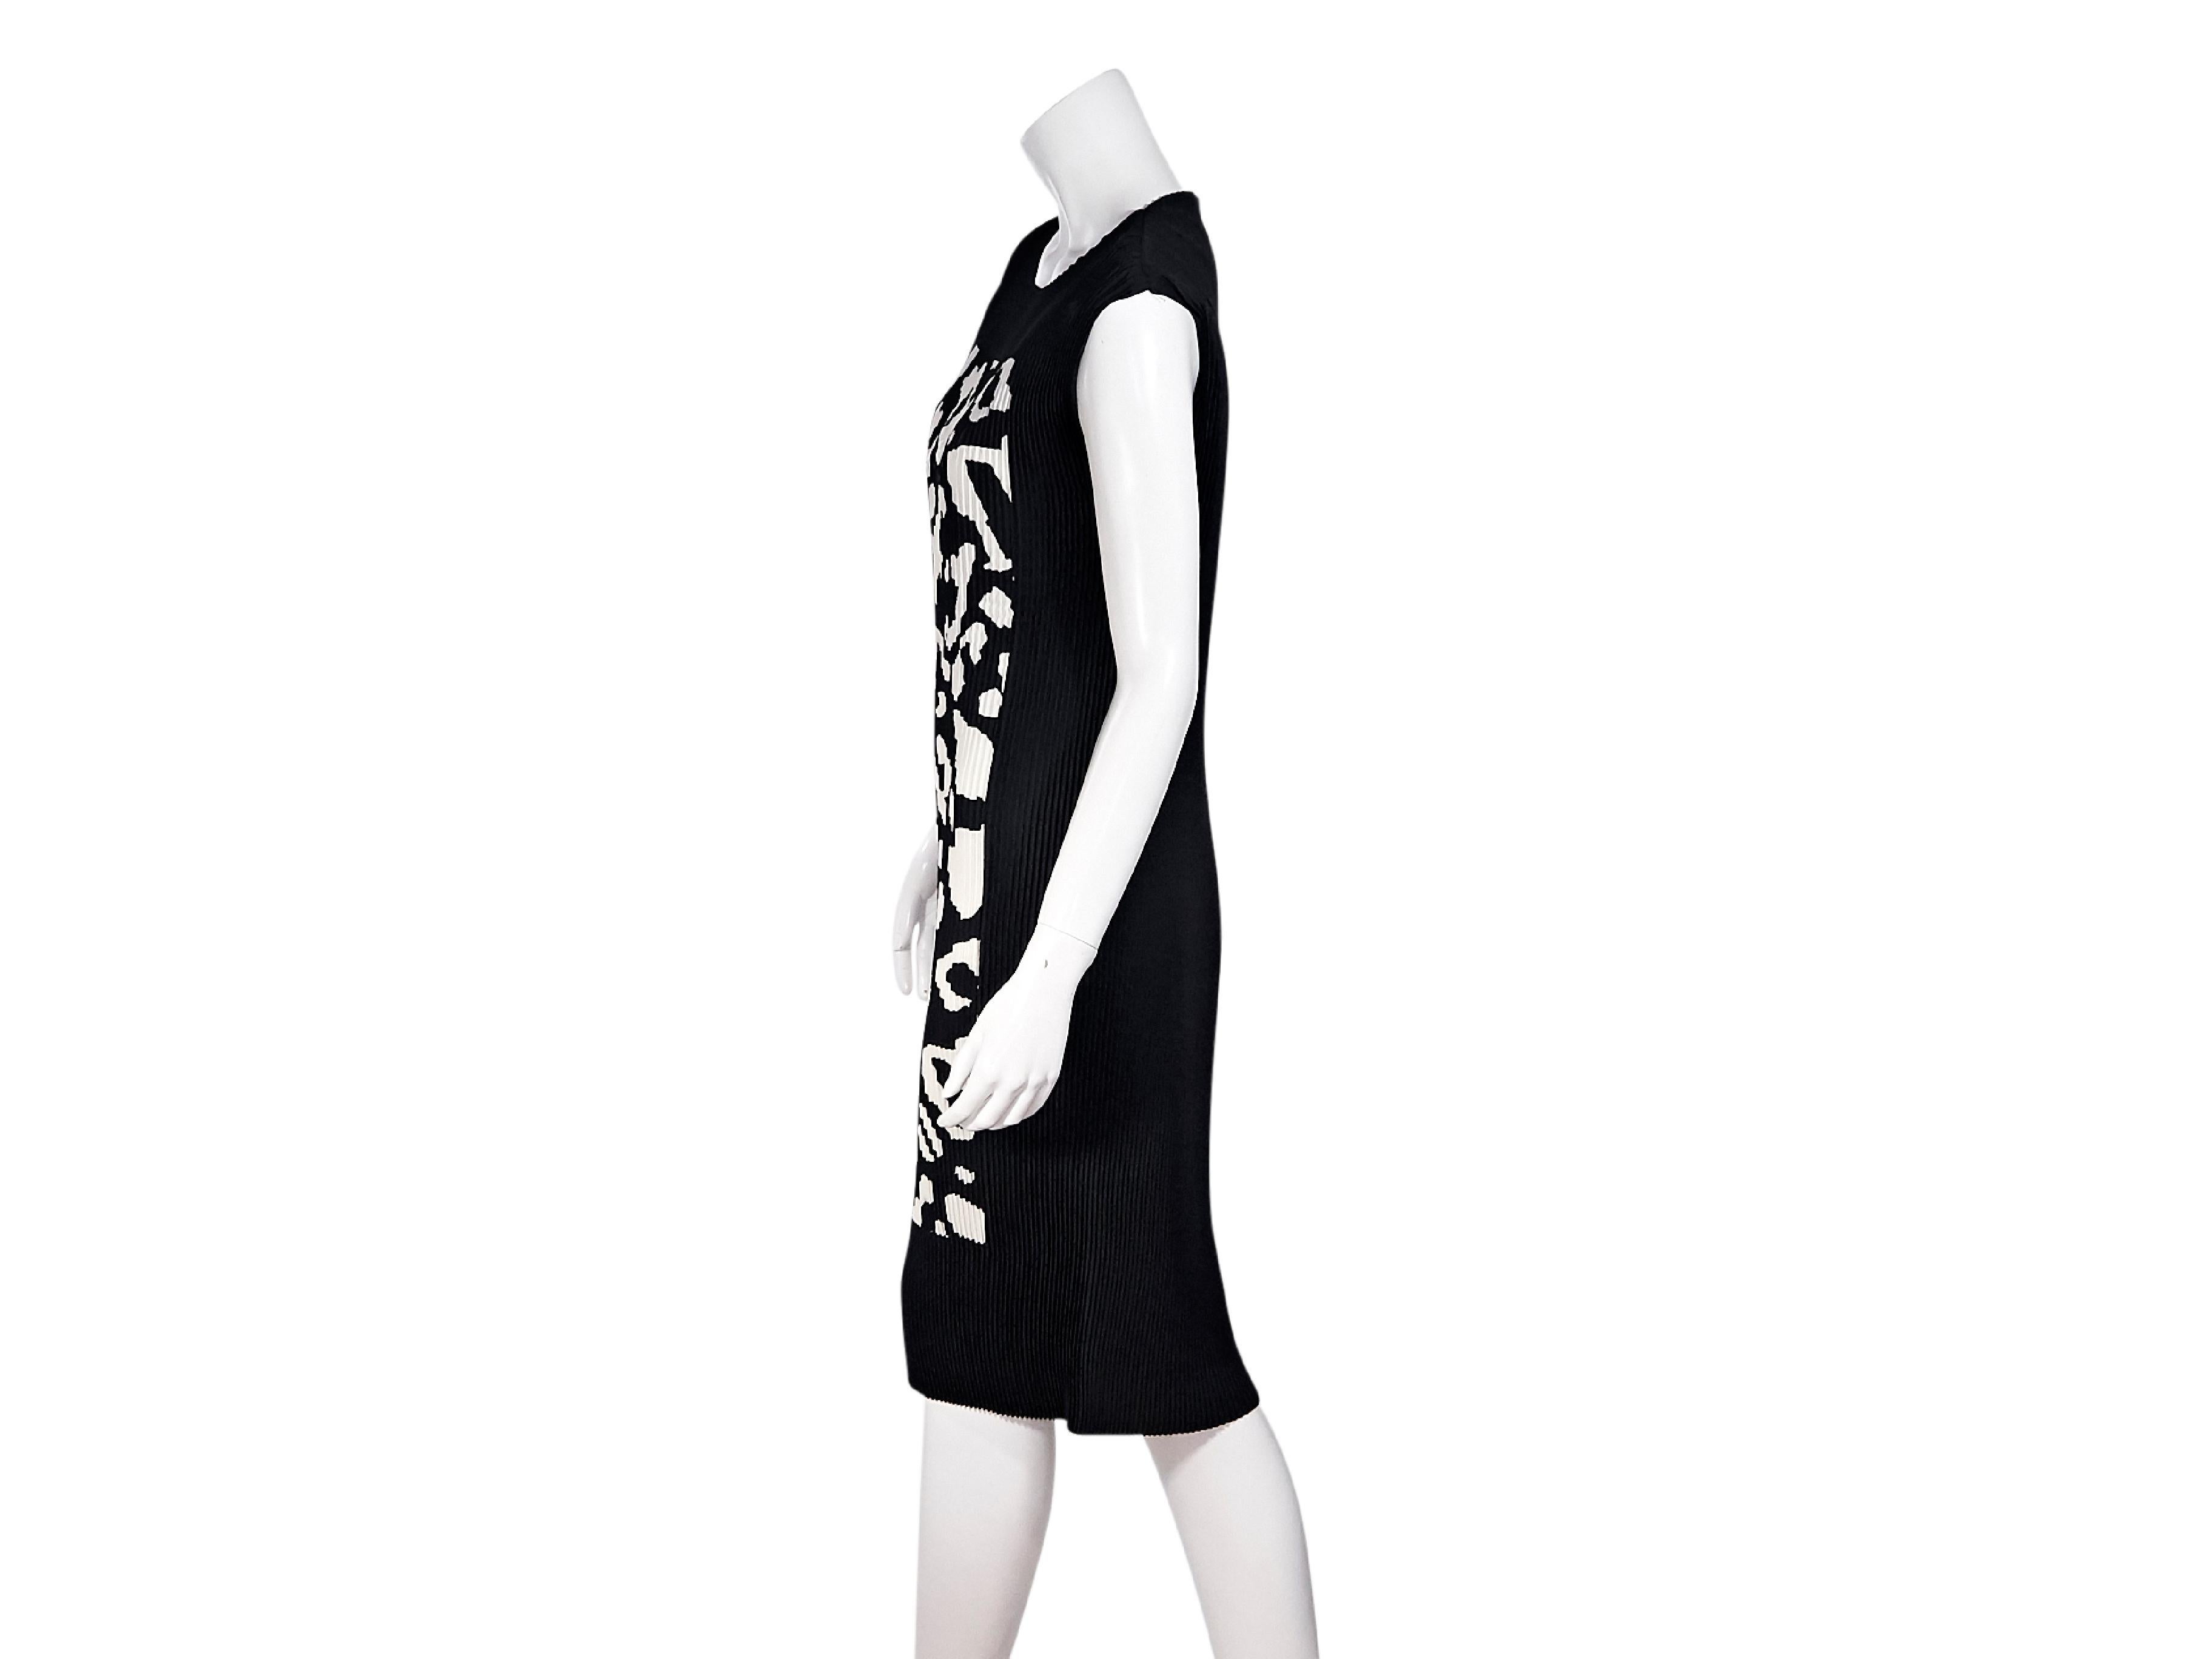 Product details:  Black and white printed pleated shift dress by Escada.  Wide jewelneck.  Cap sleeves.  Printed-front design.  Pullover style.  36